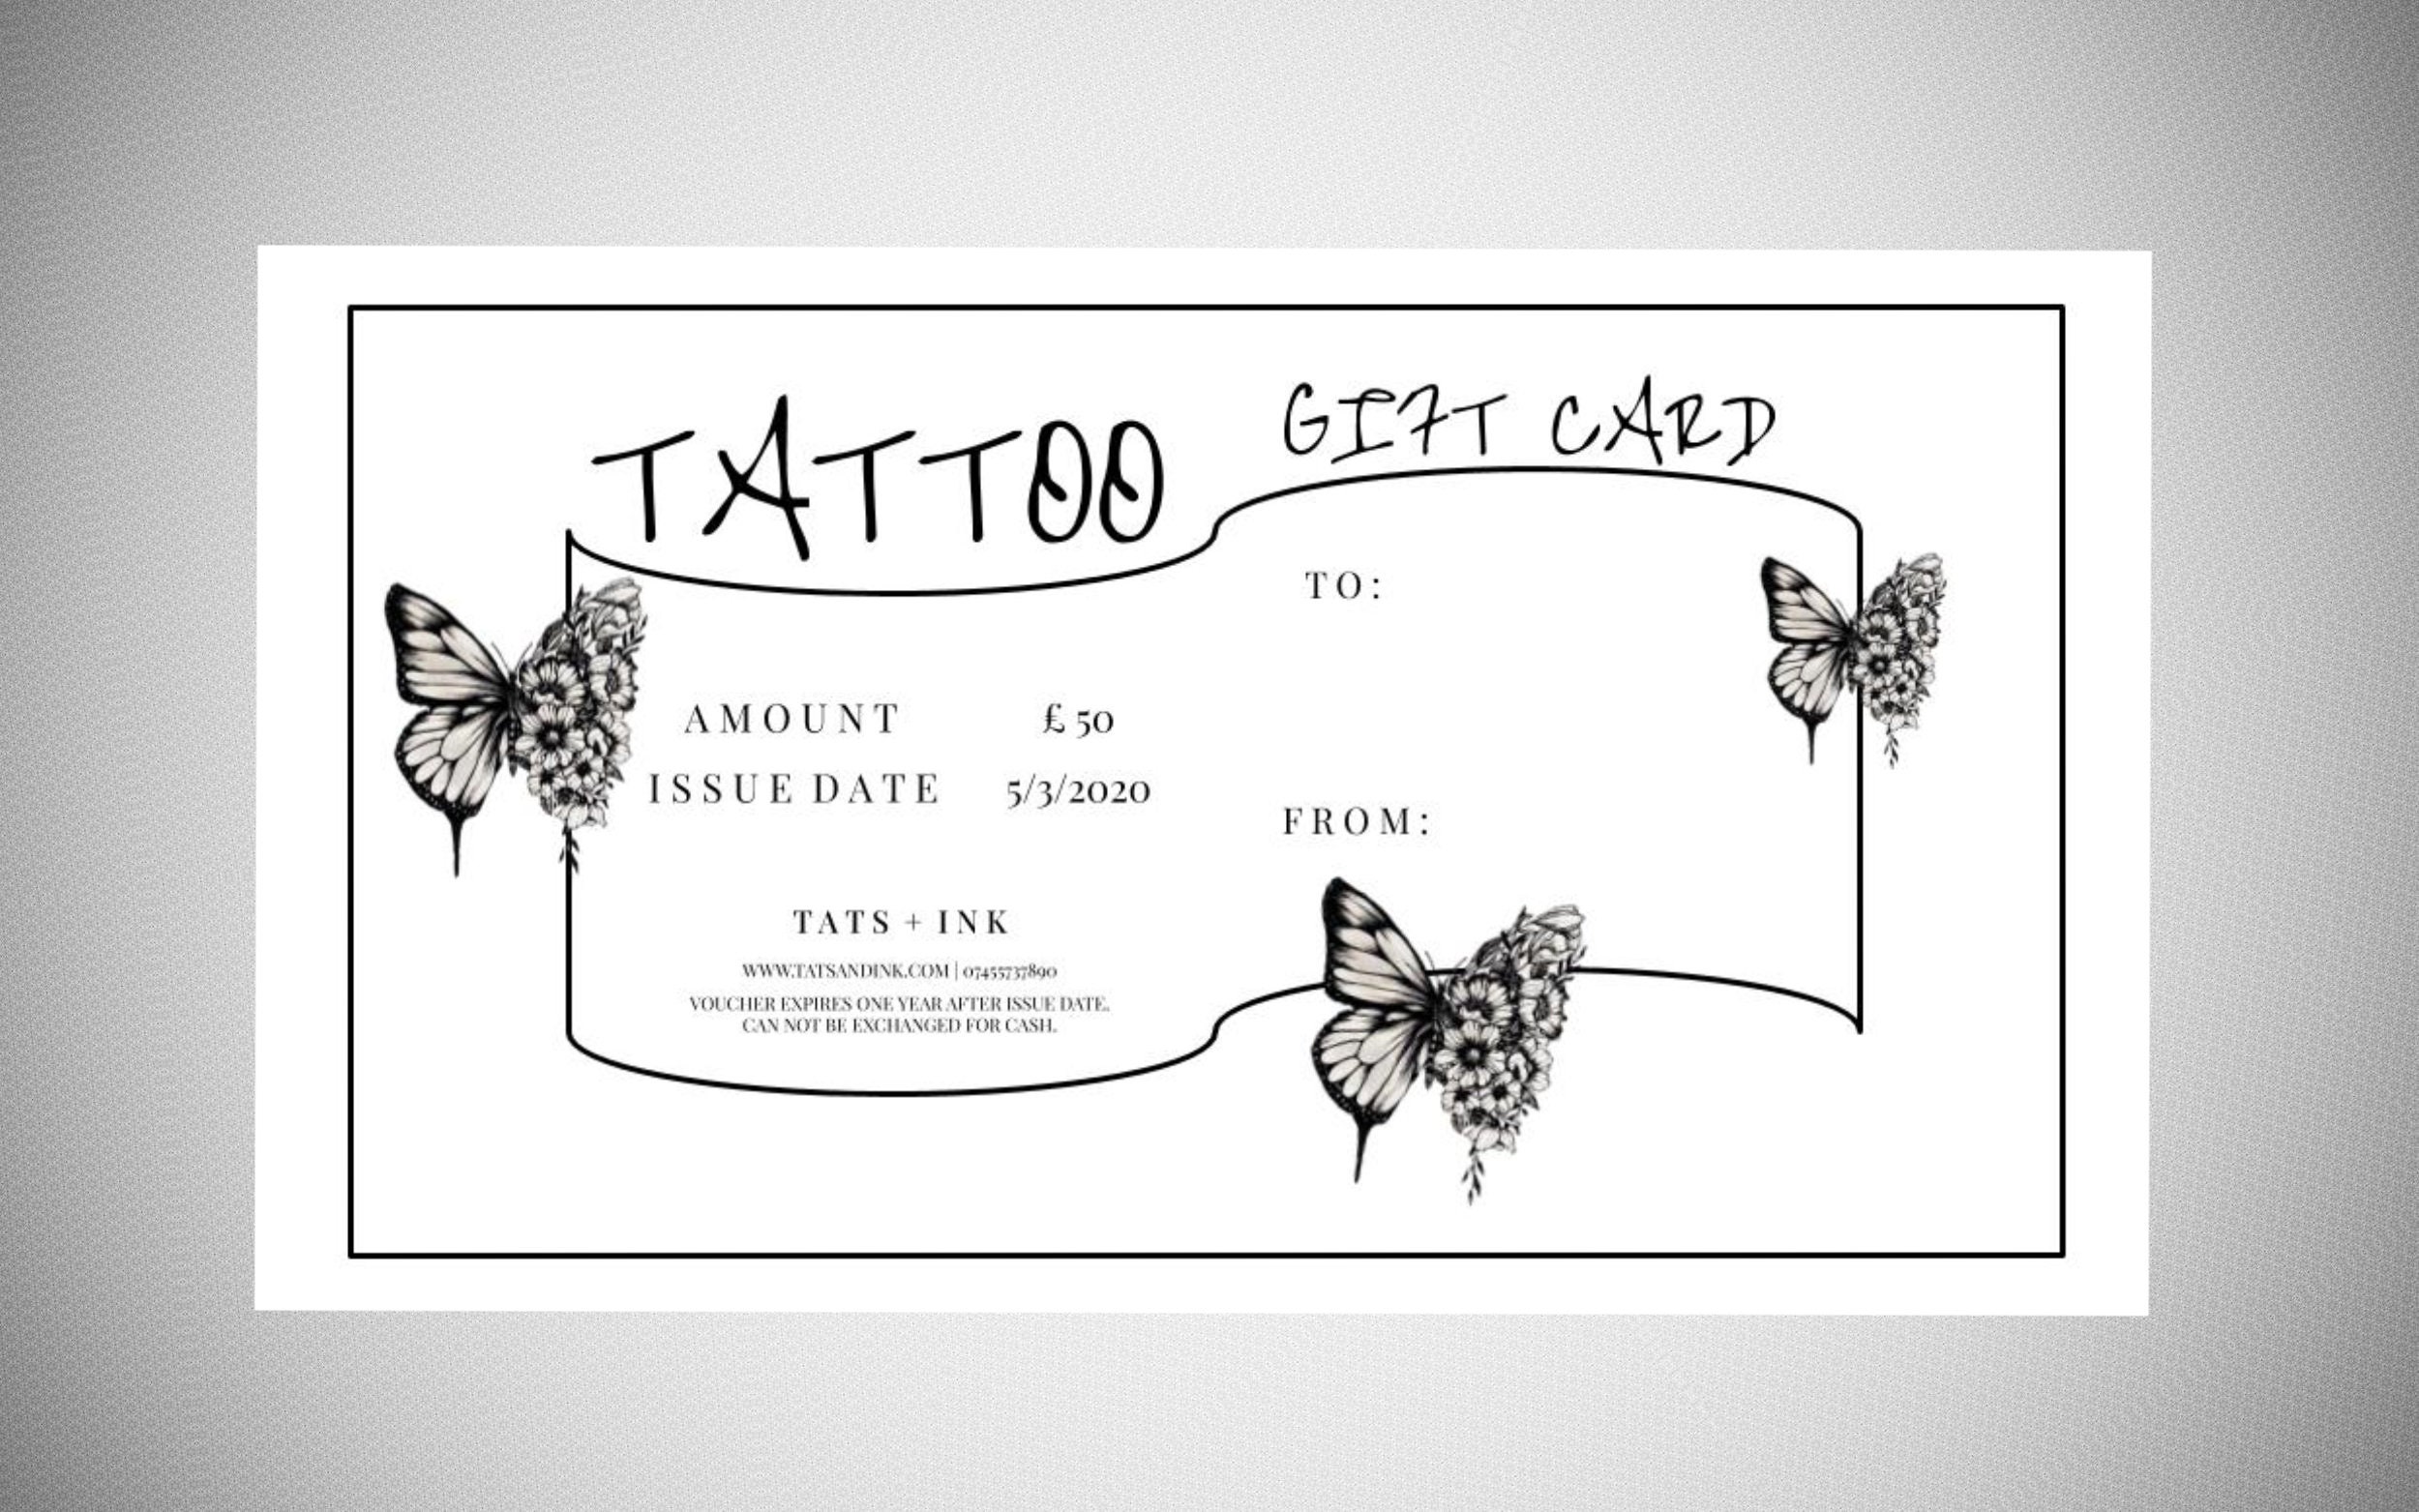 Tattoo Gift Certificate Editable Gift Certificate Template Etsy